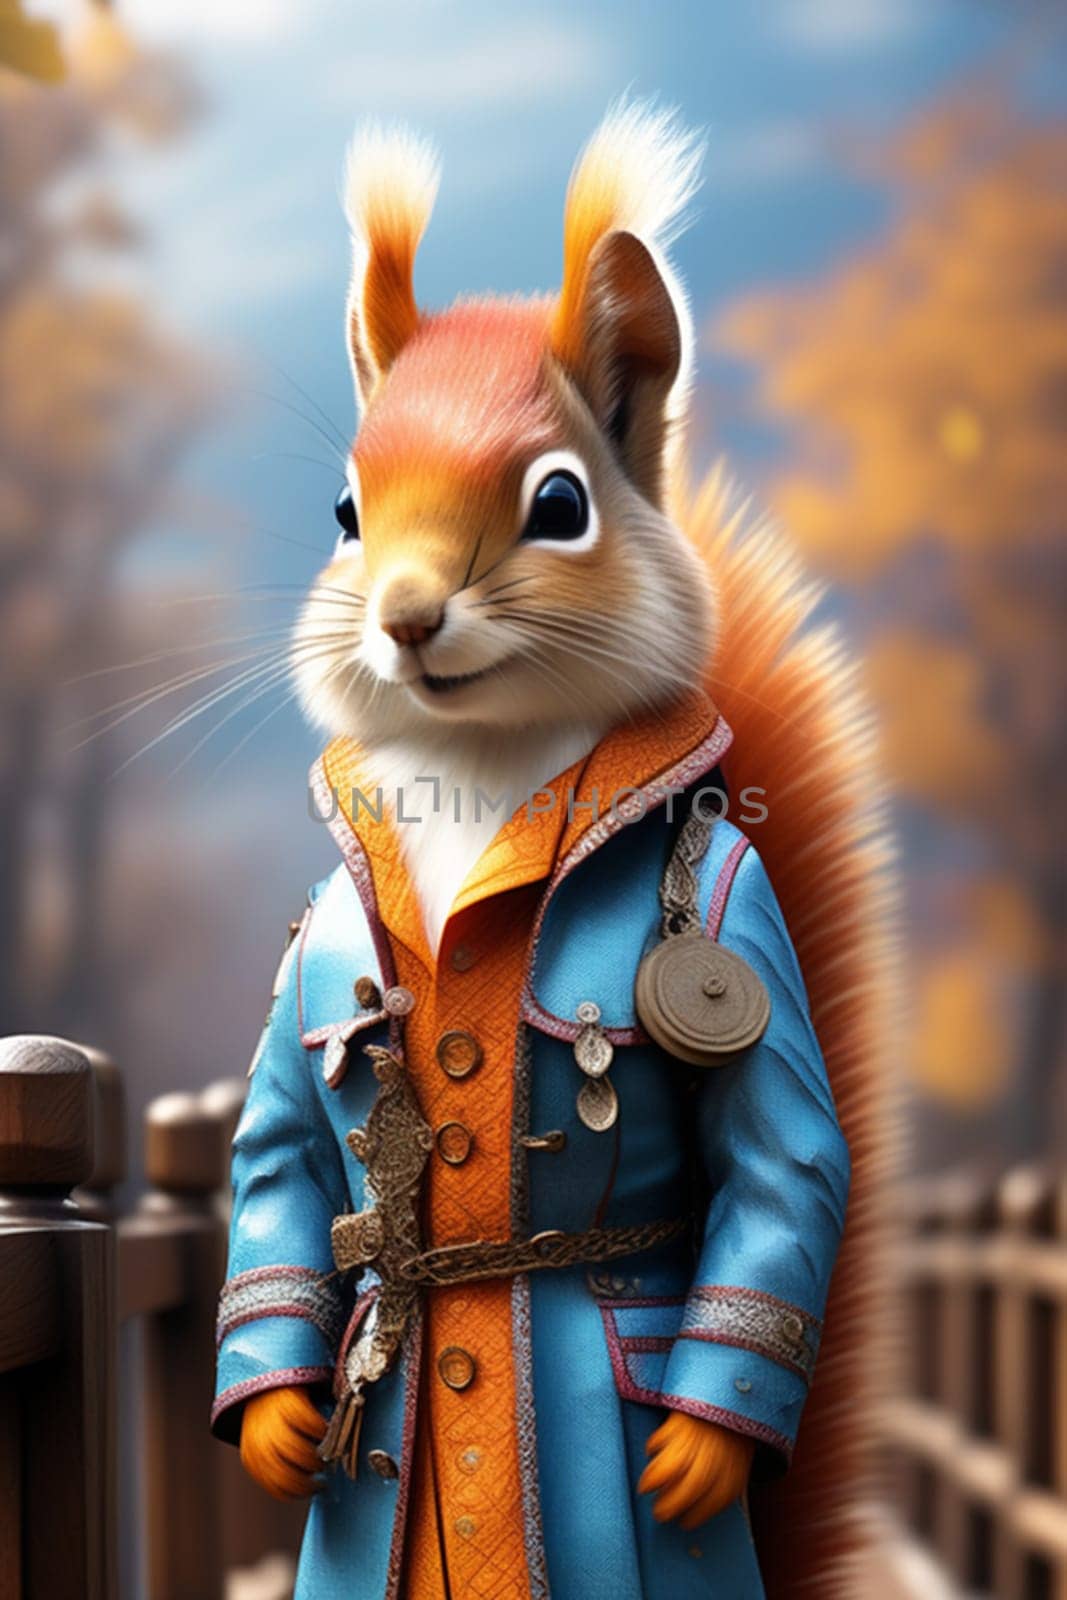 Squirrel man wearing a retro colorful multi-branched jacket by Ekaterina34